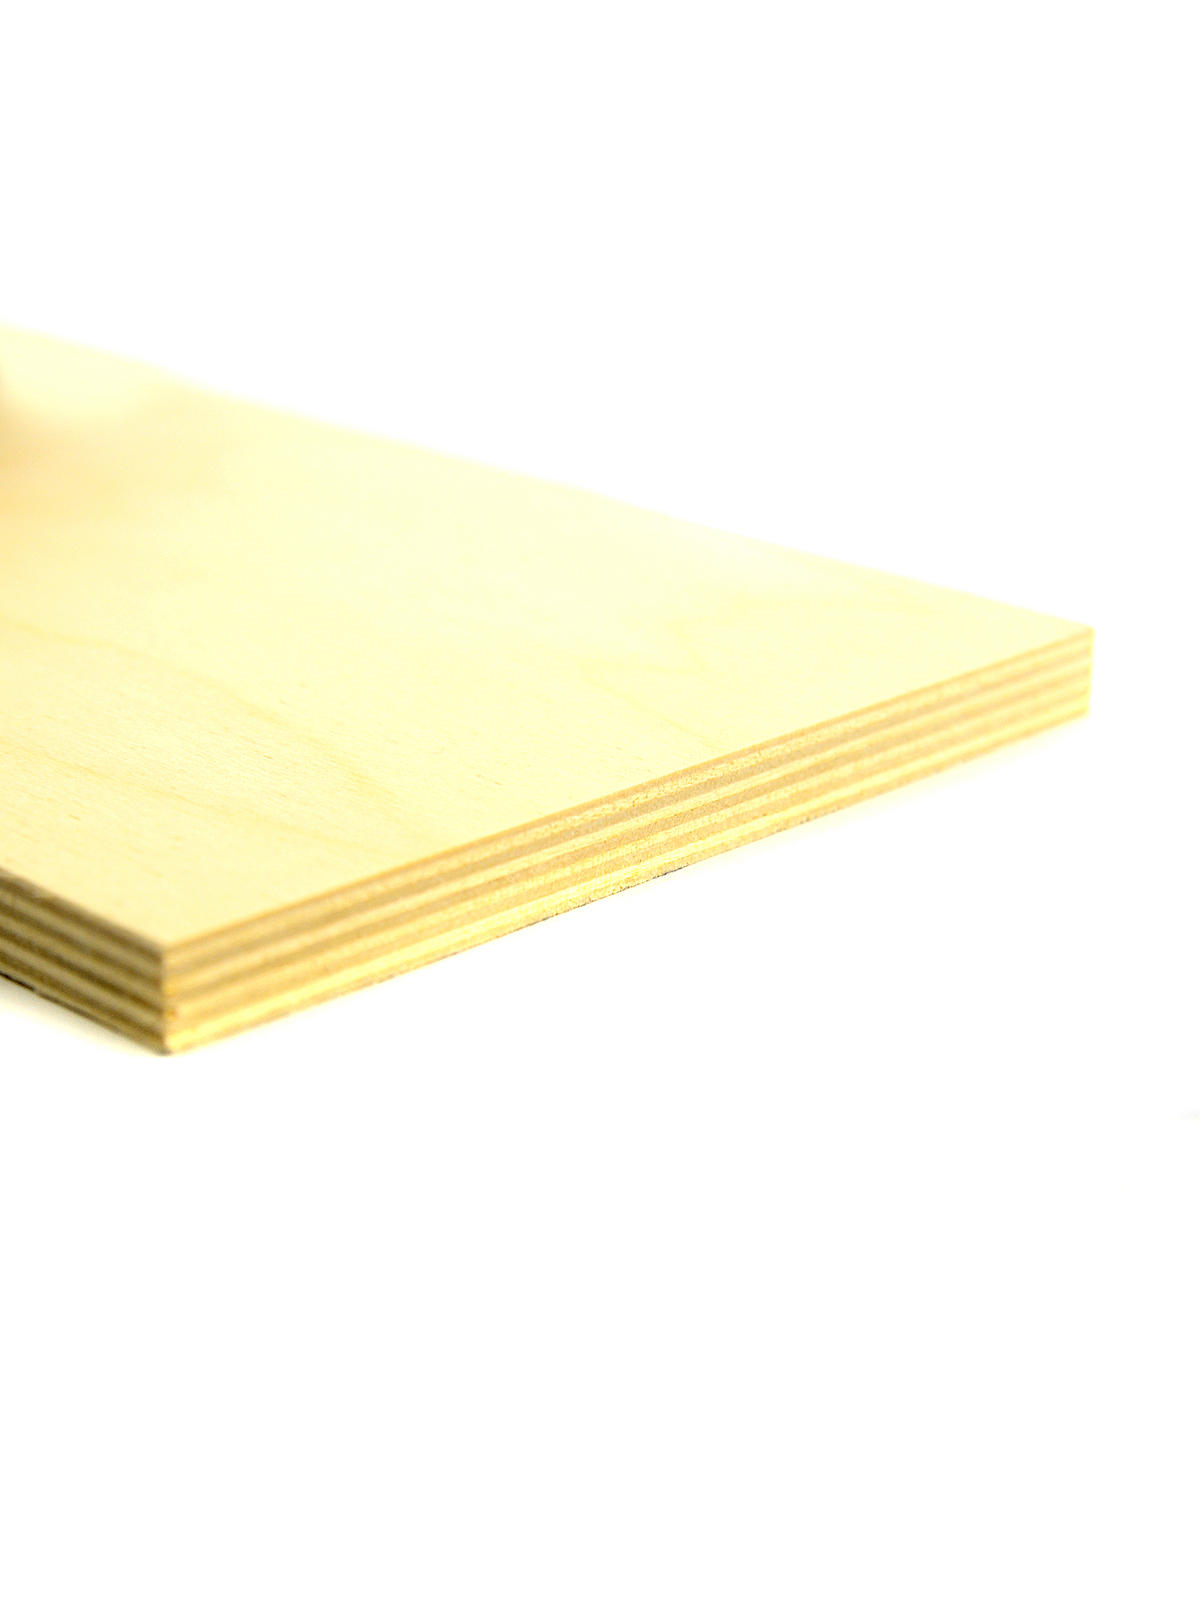 Craft Plywood Sheets 1 2 In. 6 In. X 12 In.